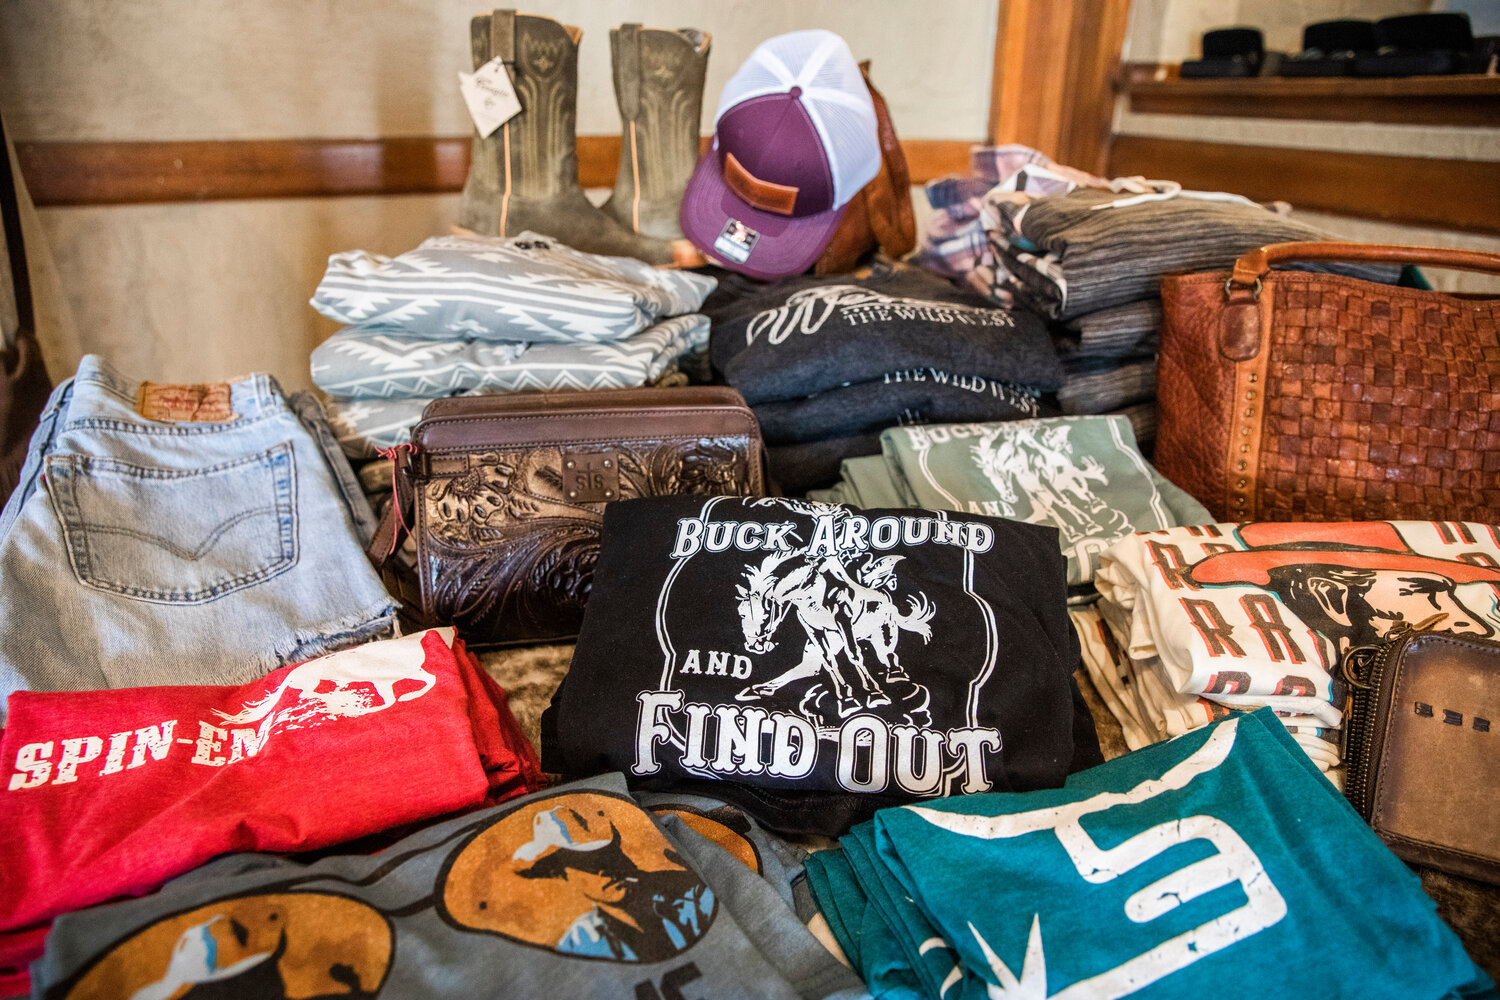 Western clothing and accessories sit on display inside Saddle Bum on Monday, May 8 in downtown Centralia.